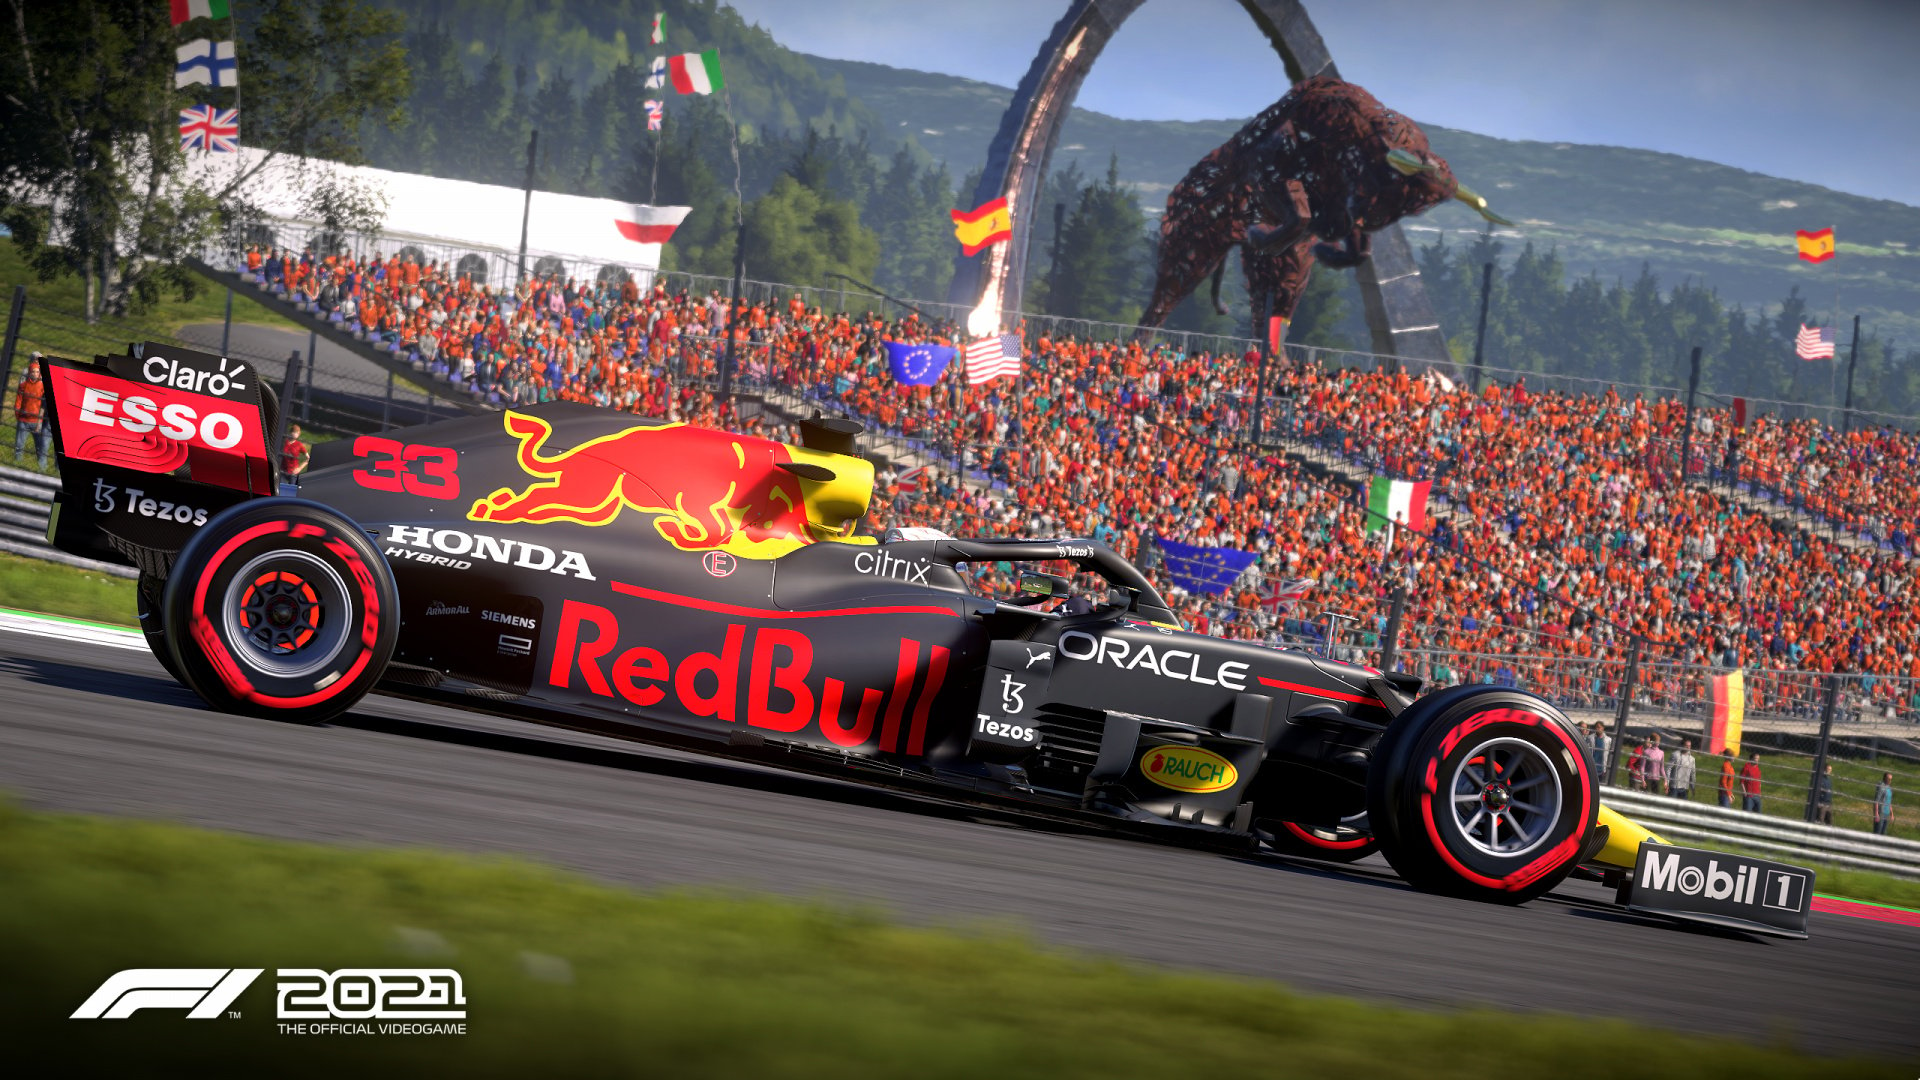 F1 2021 (PS5 / PlayStation 5) Game Profile | News, Reviews, Videos